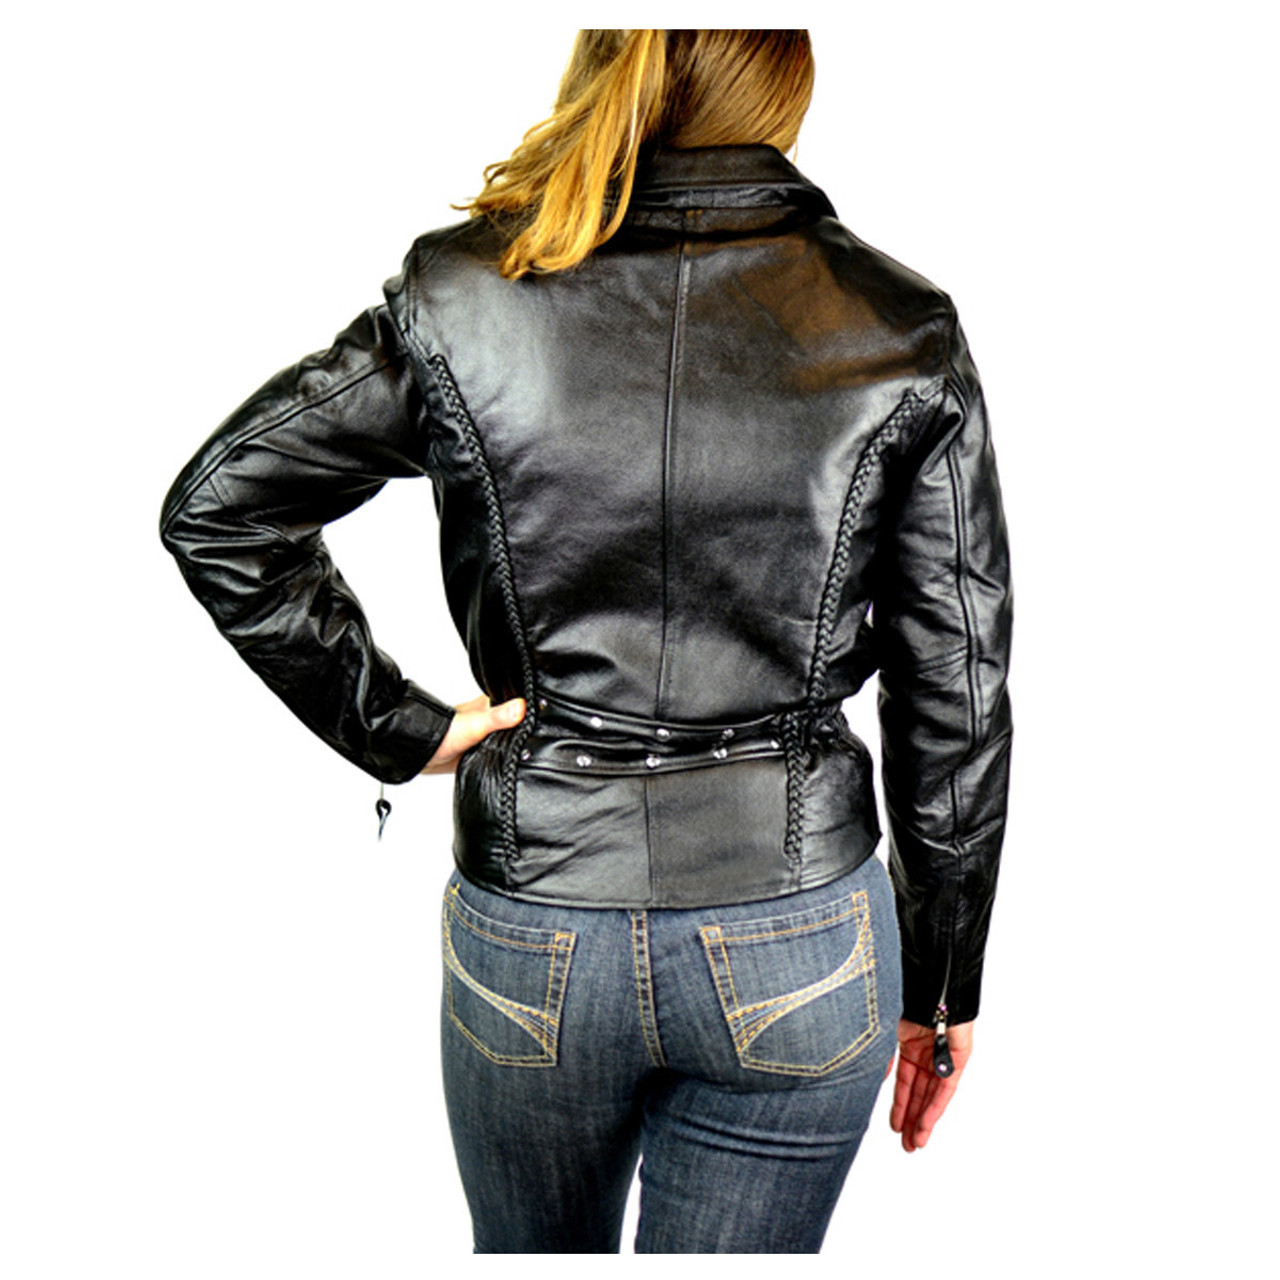 Detour 8307 Women's Leather Motorcycle Jacket - Team Motorcycle